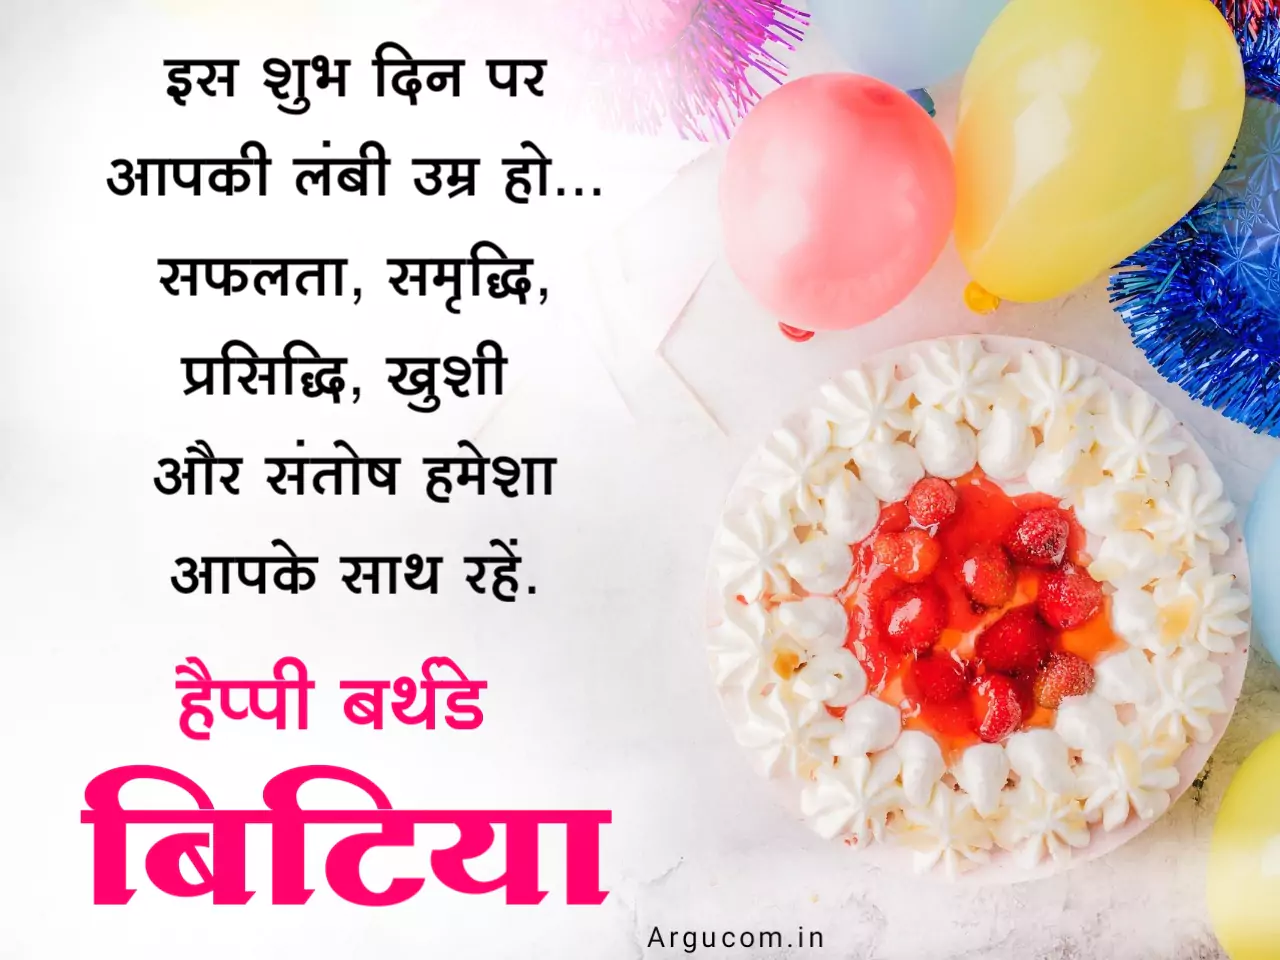 Happy birthday images for daughter in hindi